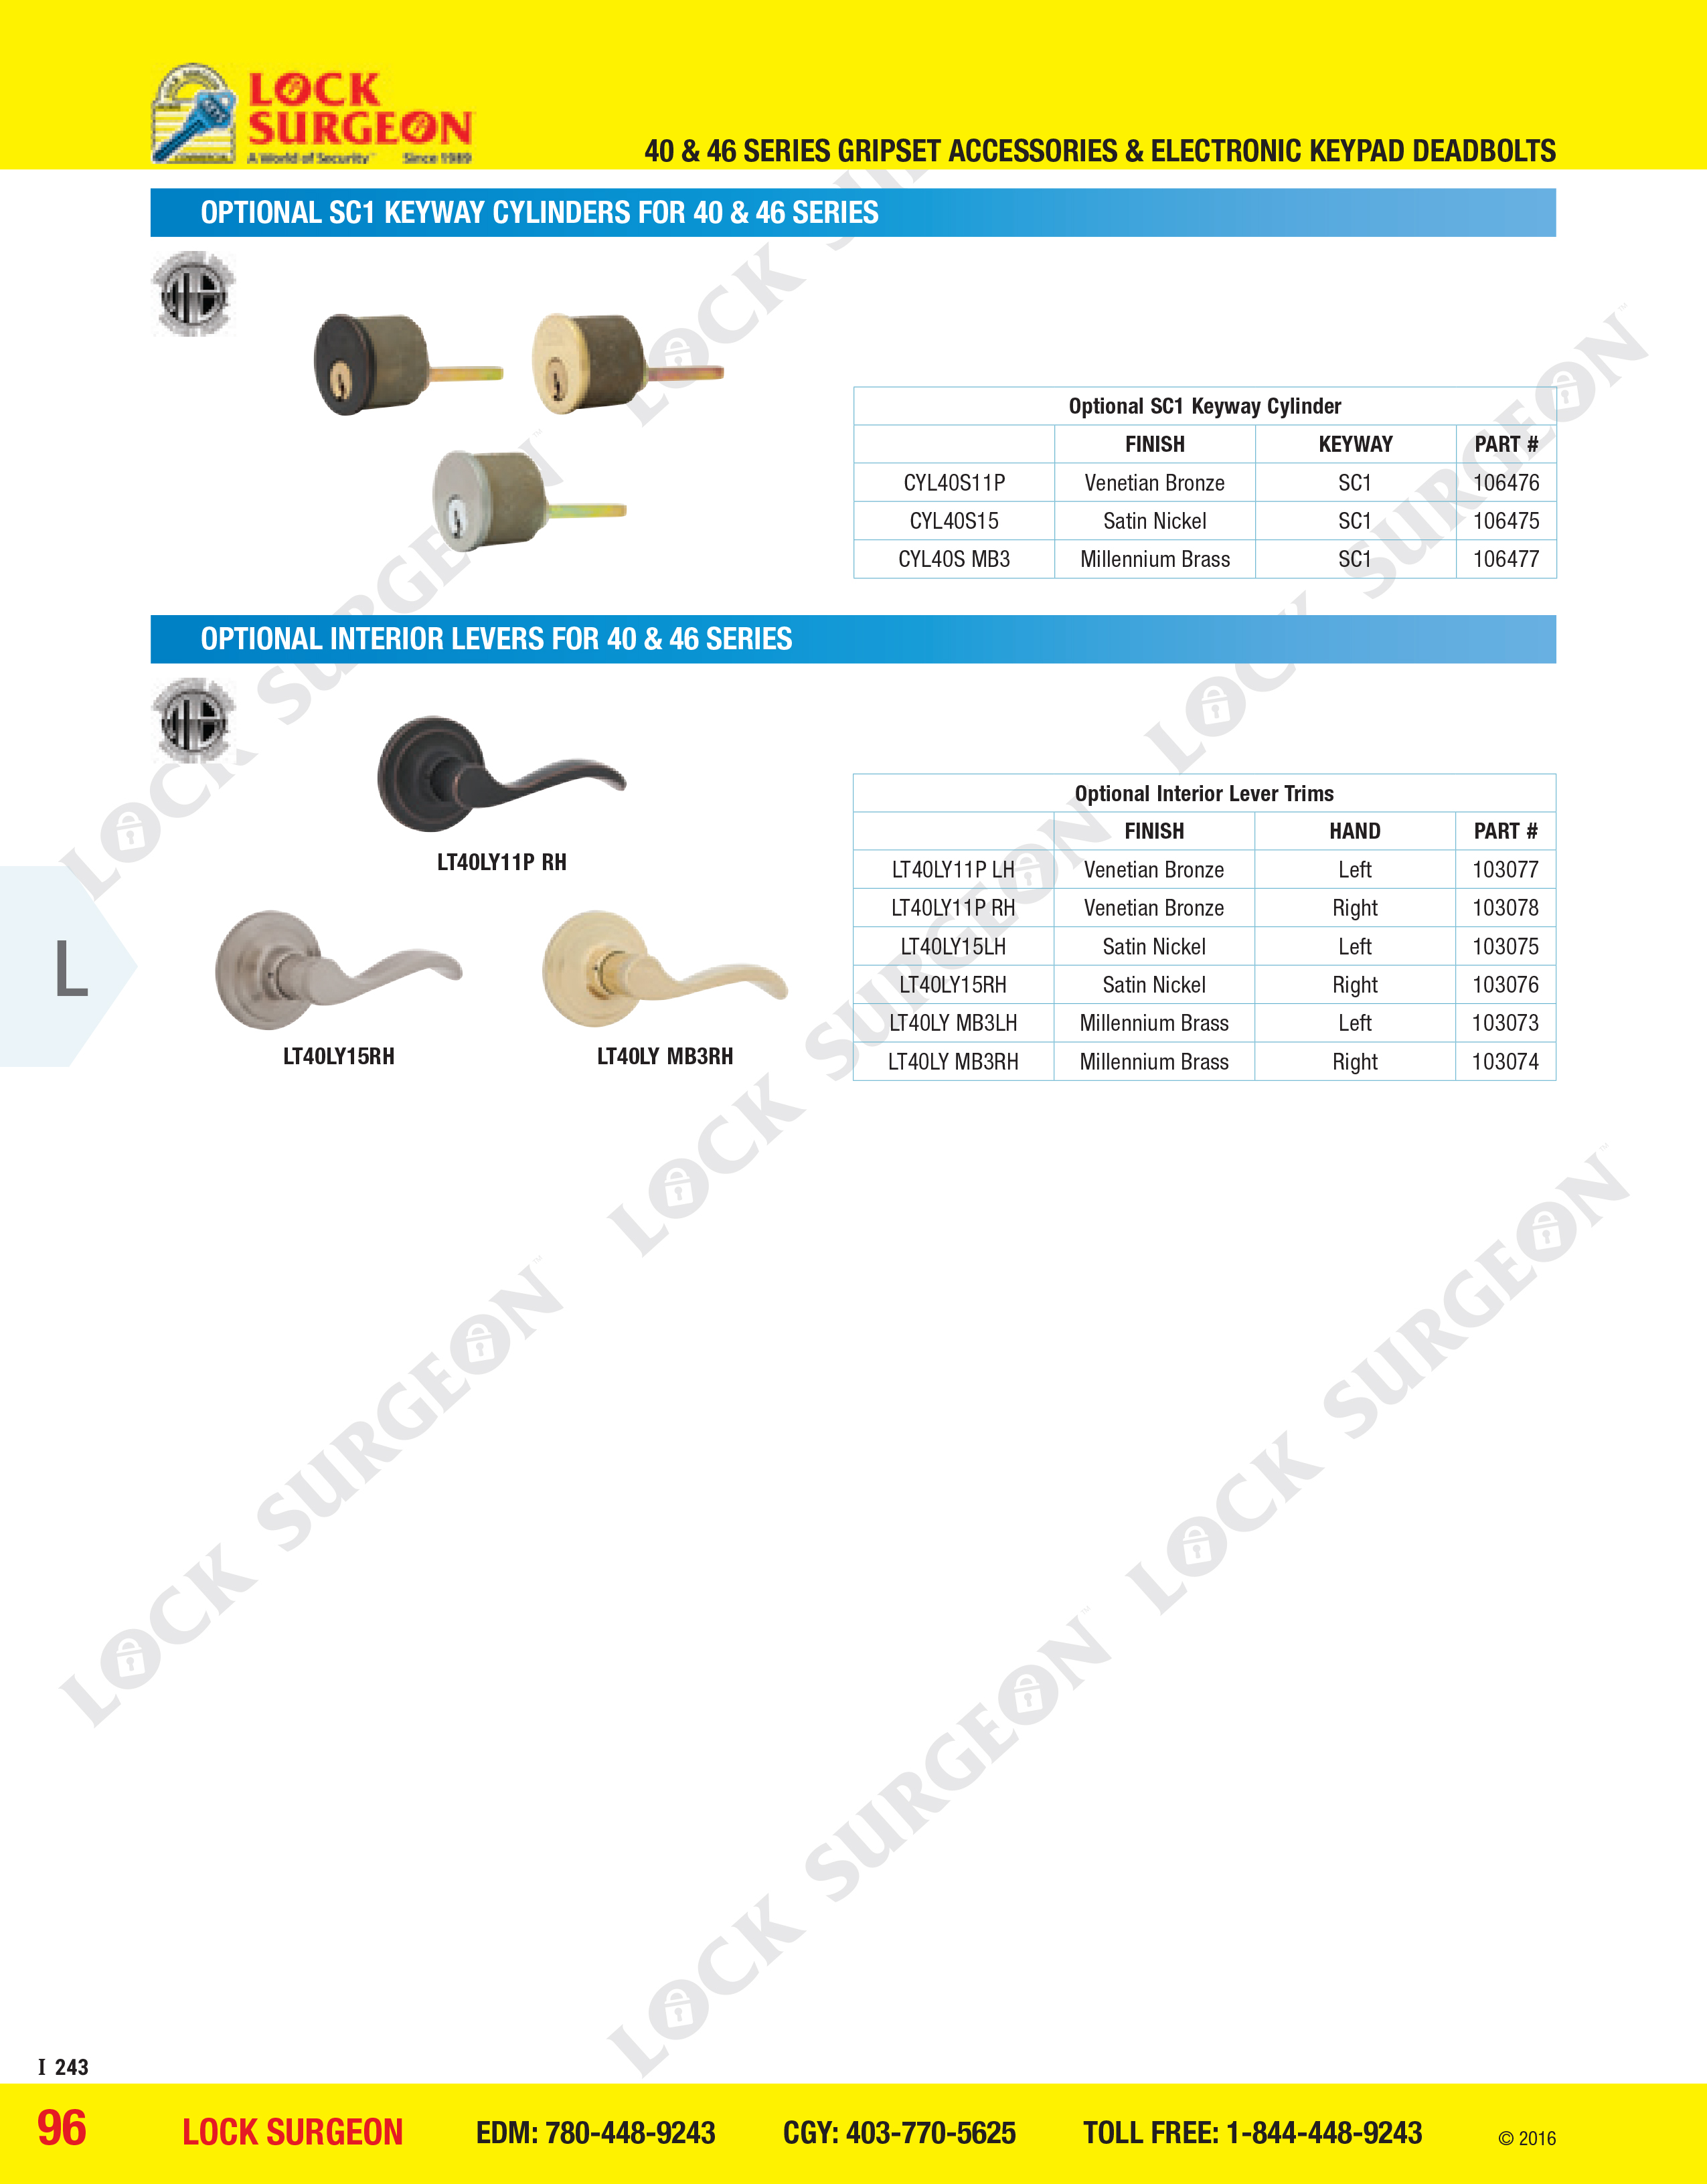 Alternate locking cylinders and lever handles for interior of grip-sets sold by Lock Surgeon.